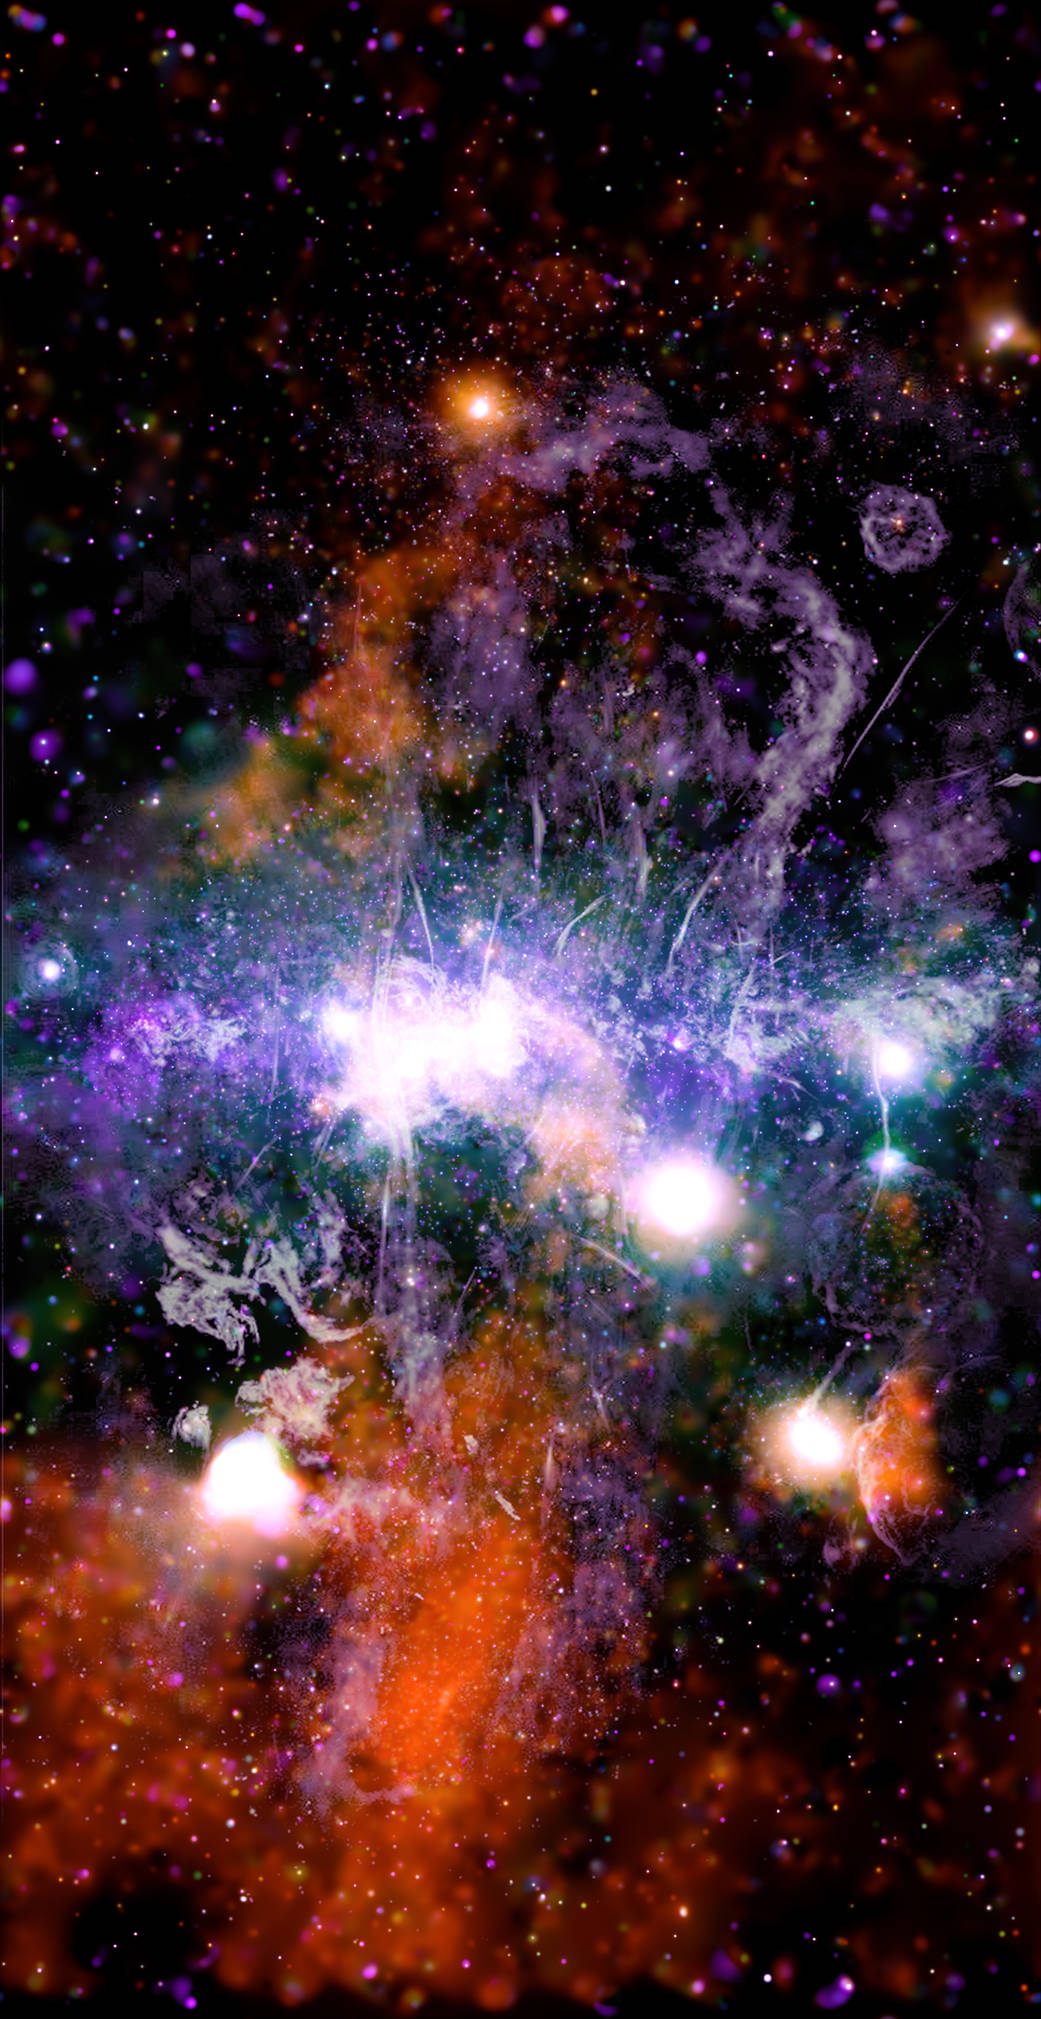 A panorama of the Galactic Center builds on previous surveys from Chandra and other telescopes. 